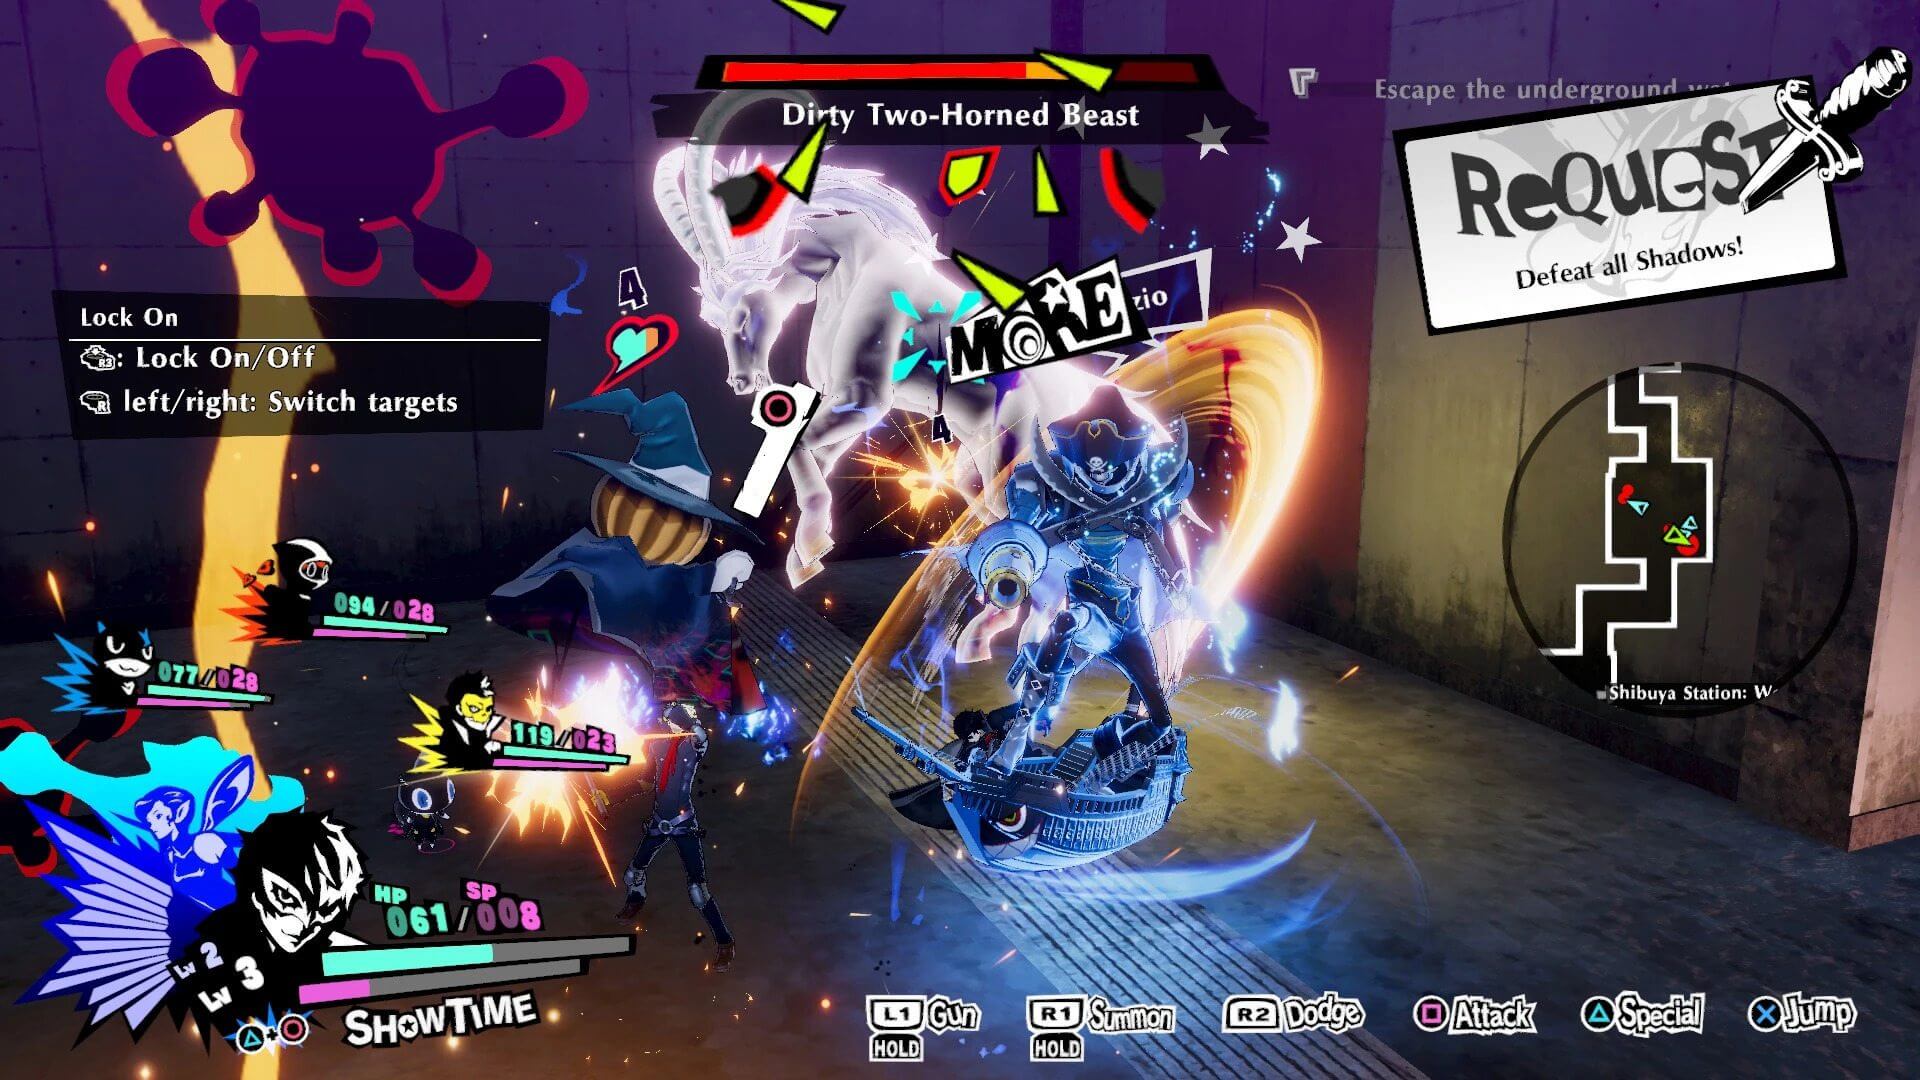 Persona 5 Strikers brought real-time action gameplay in the flashy Persona style